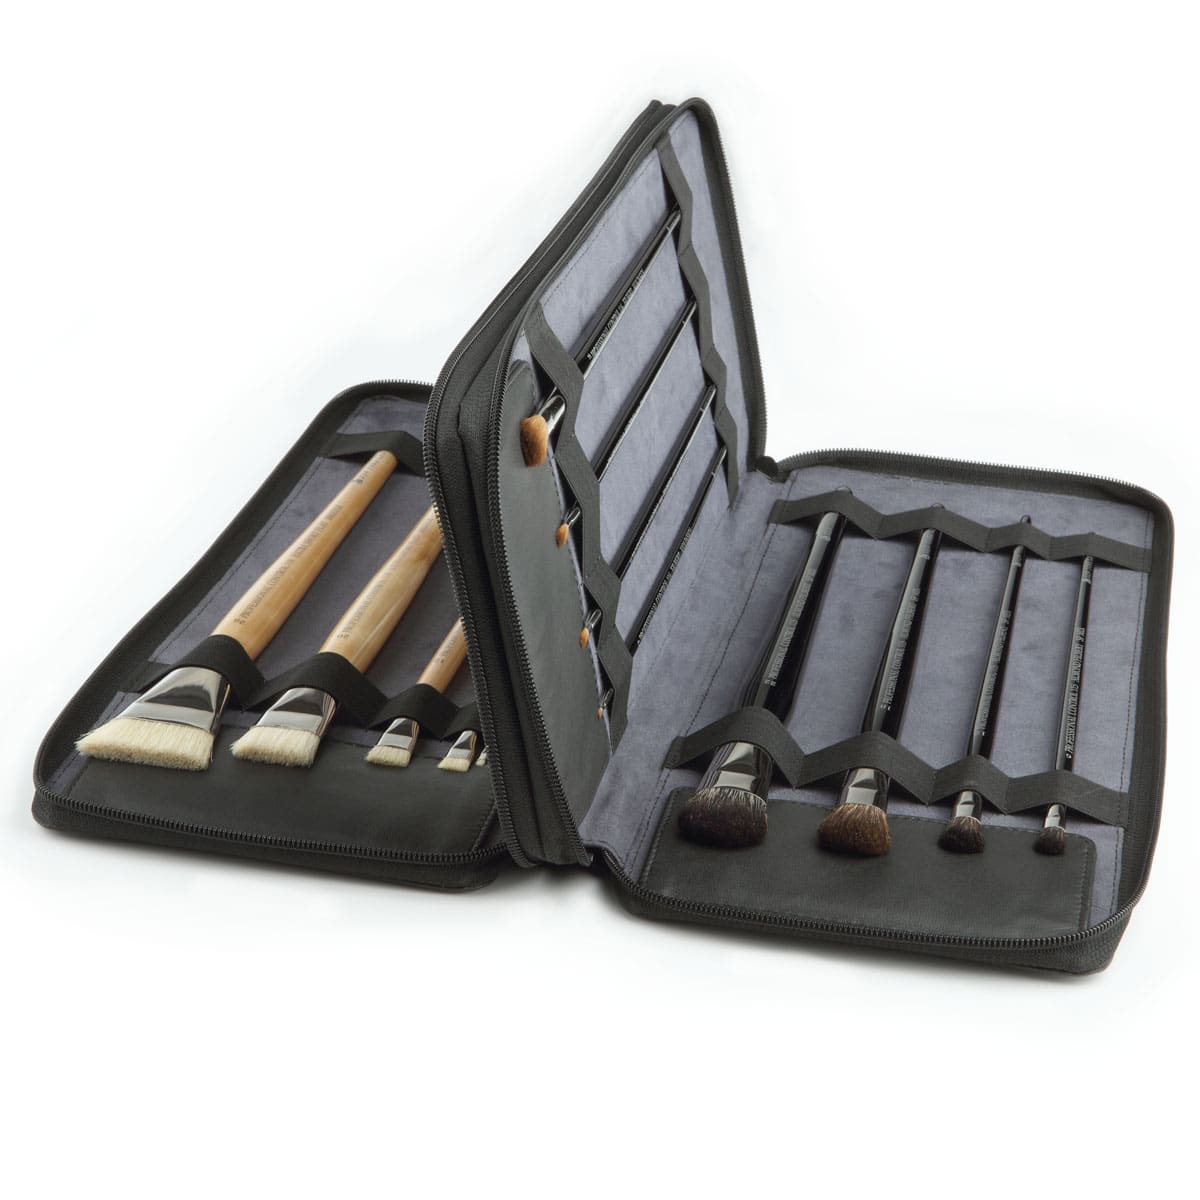 Ultimate 19 Control Brush CollectionTri-Fold Deluxe Leather Case